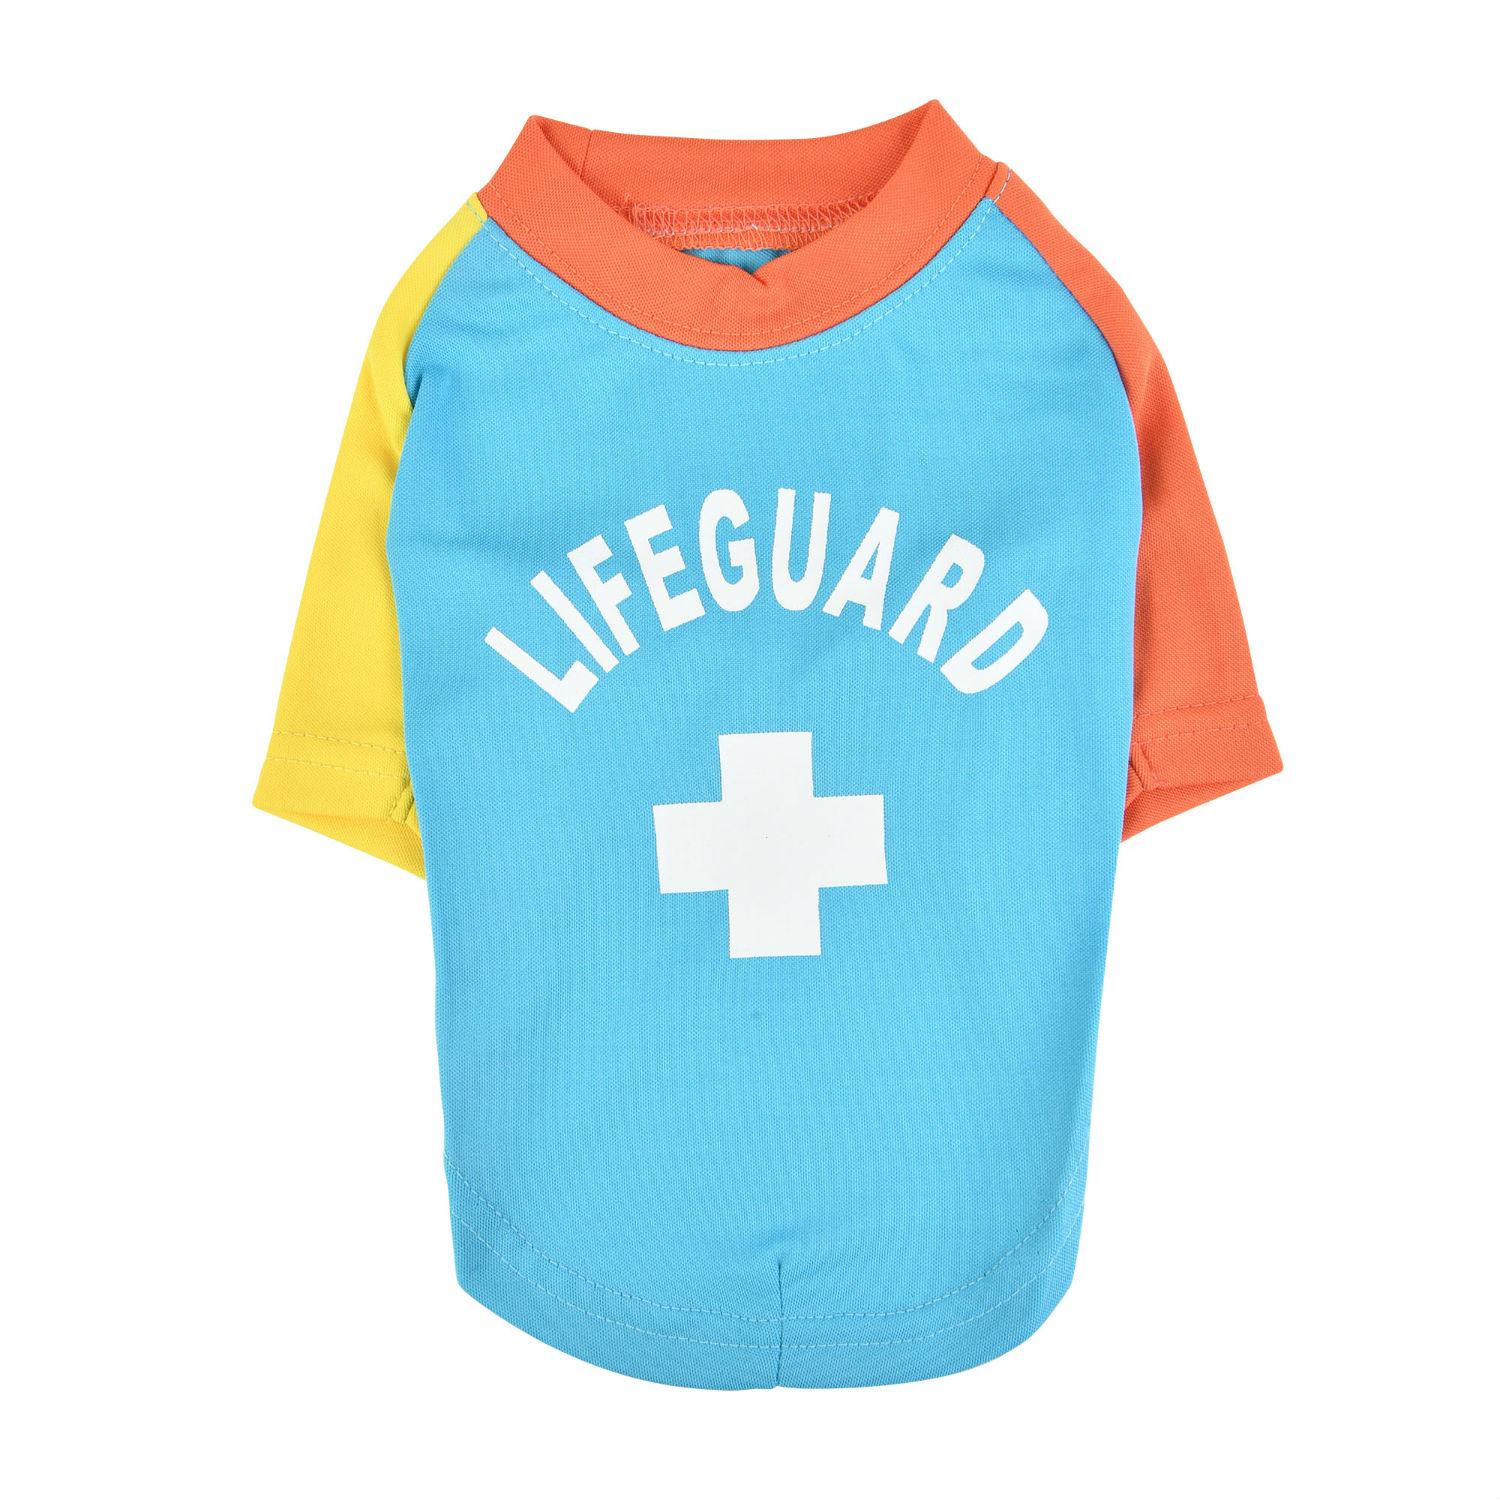 Rescuer Dog Shirt by Puppia - Sky Blue